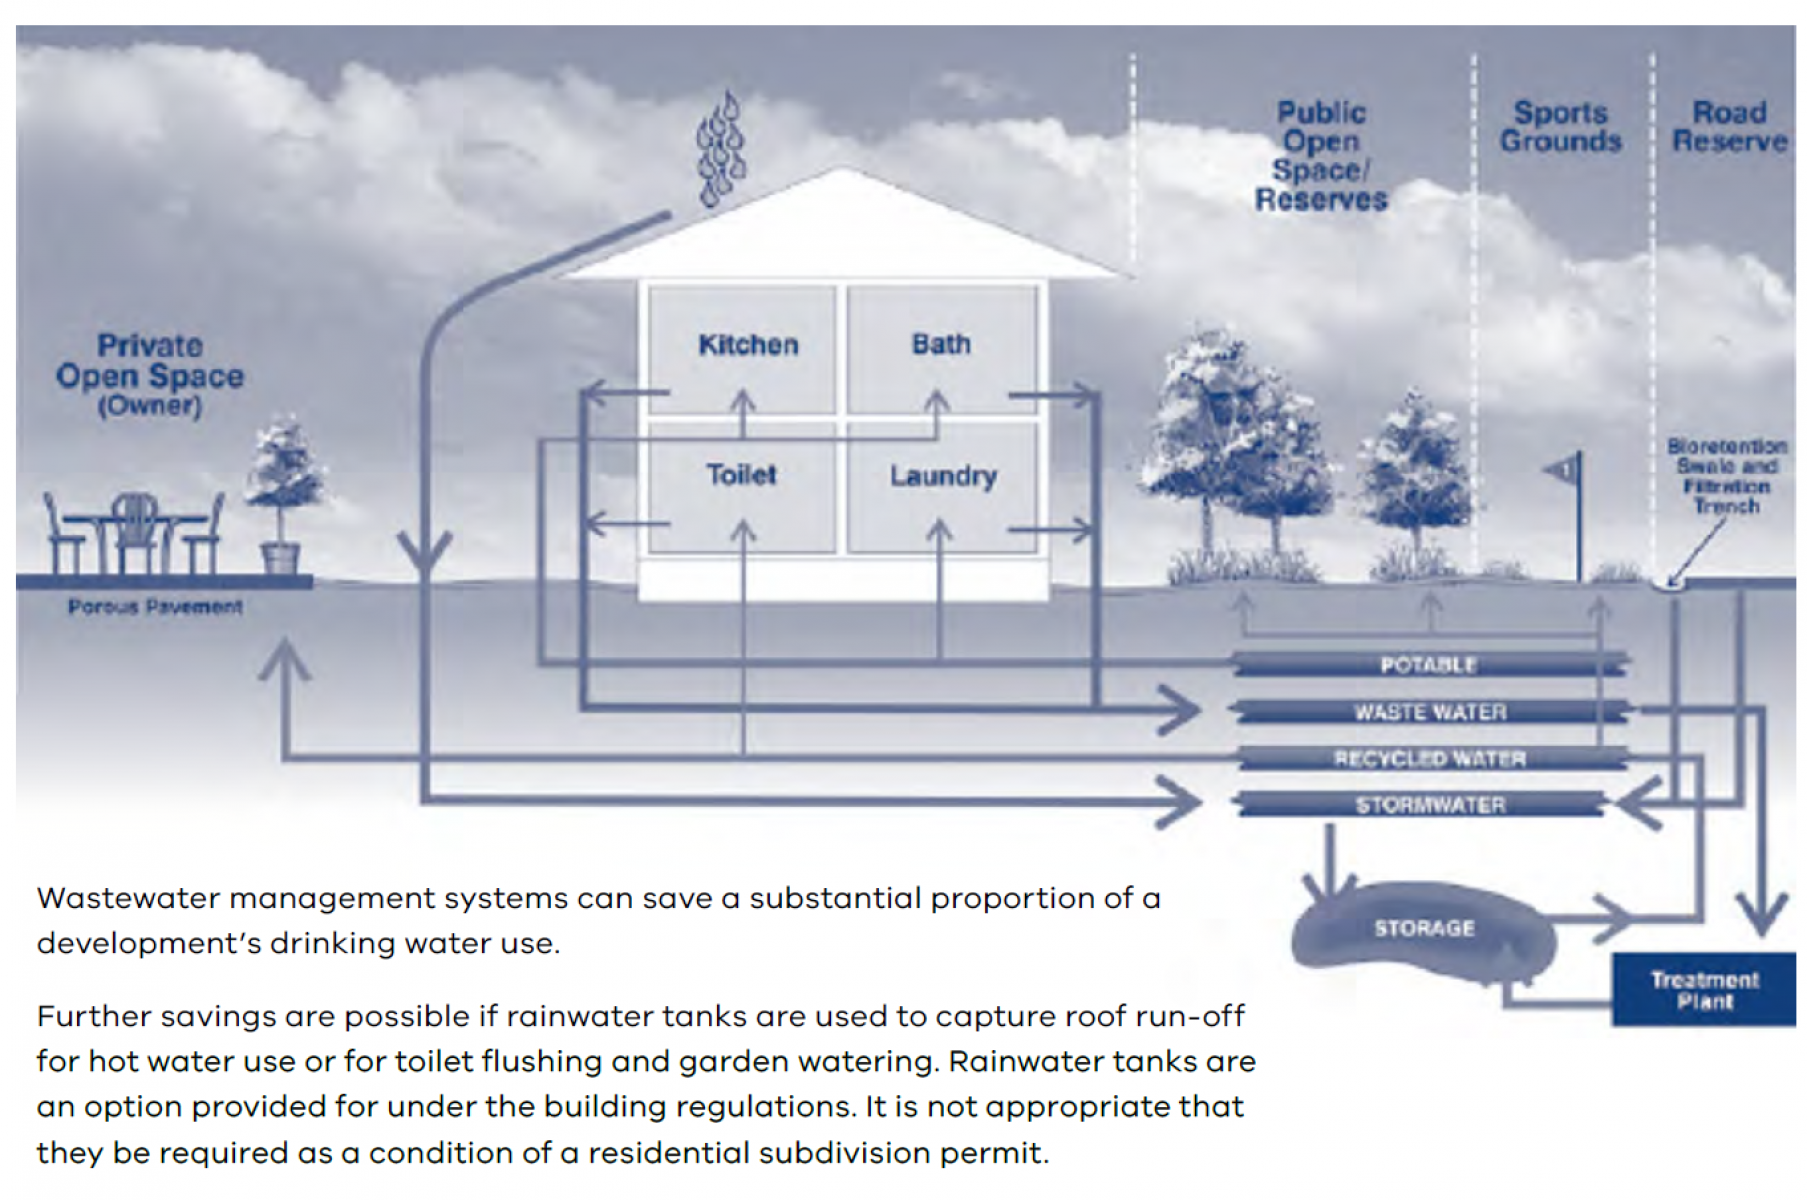 Wastewater management systems can save a substantial proportion of a development’s drinking water use. Further savings are possible if rainwater tanks are used to capture roof run-off for hot water use or for toilet flushing and garden watering. Rainwater tanks are an option provided for under the building regulations. It is not appropriate that they be required as a condition of a residential subdivision permit.